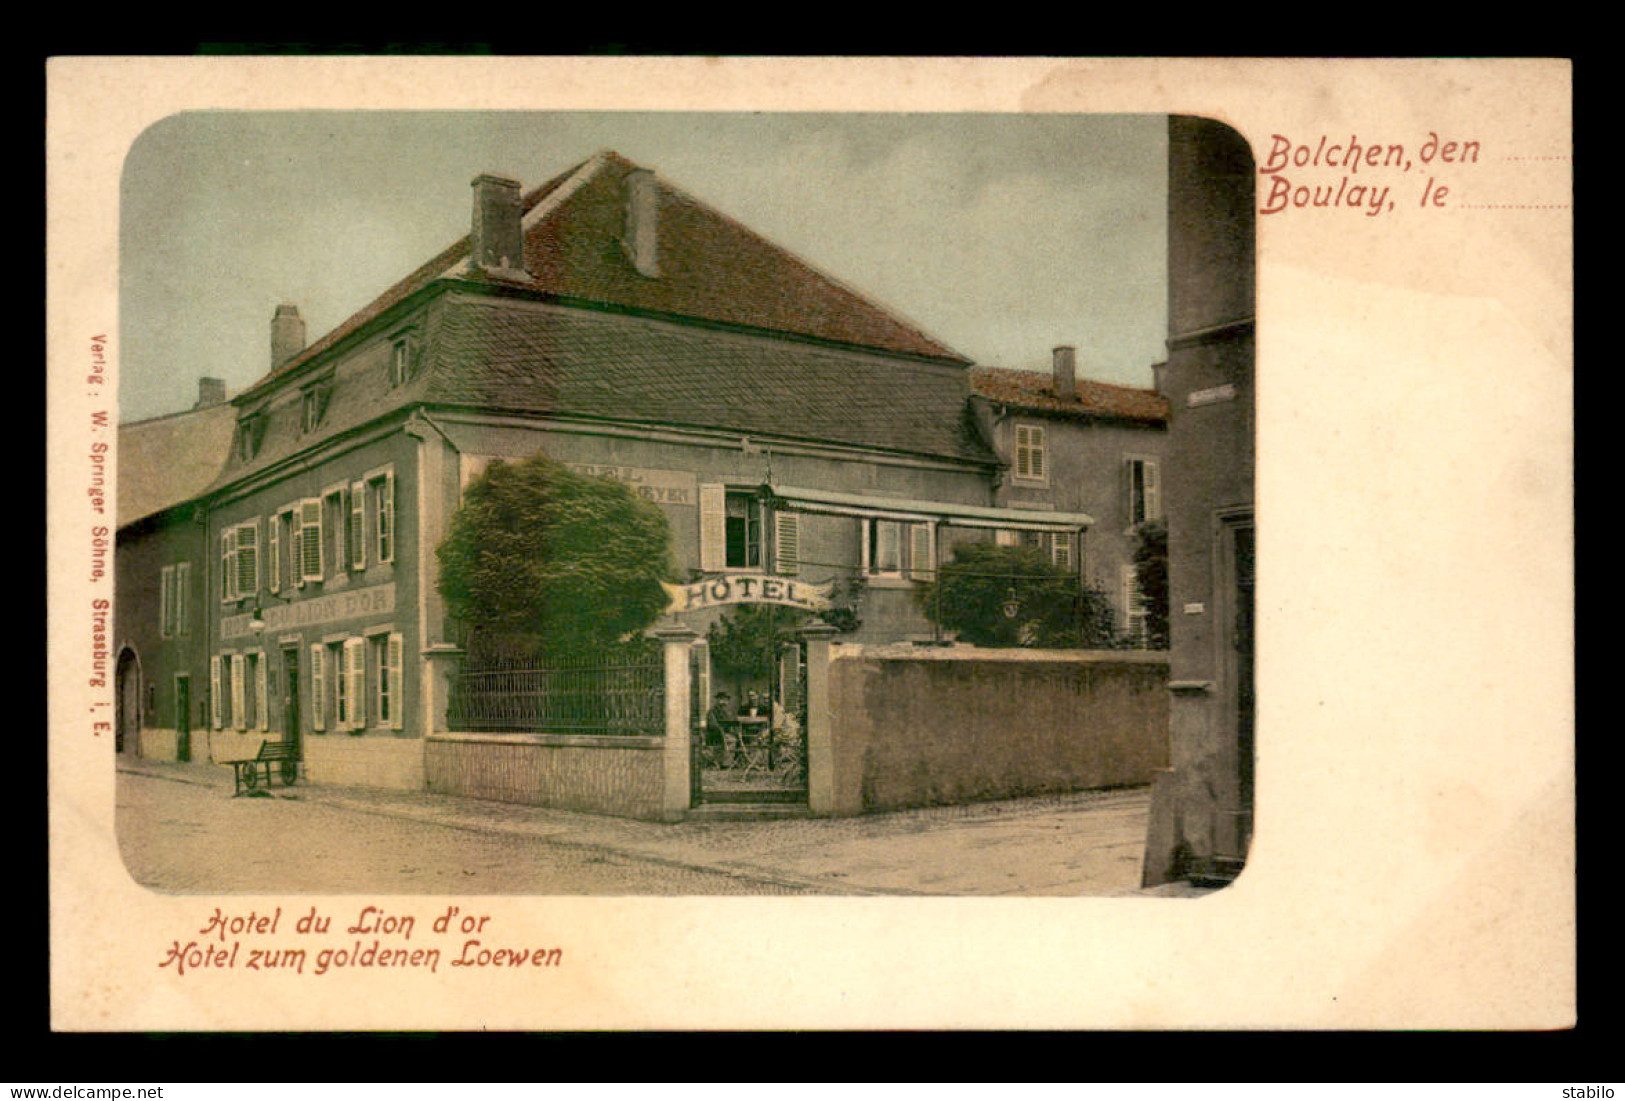 57 - BOLCHEN - BOULAY - HOTEL DU LION D'OR - Boulay Moselle